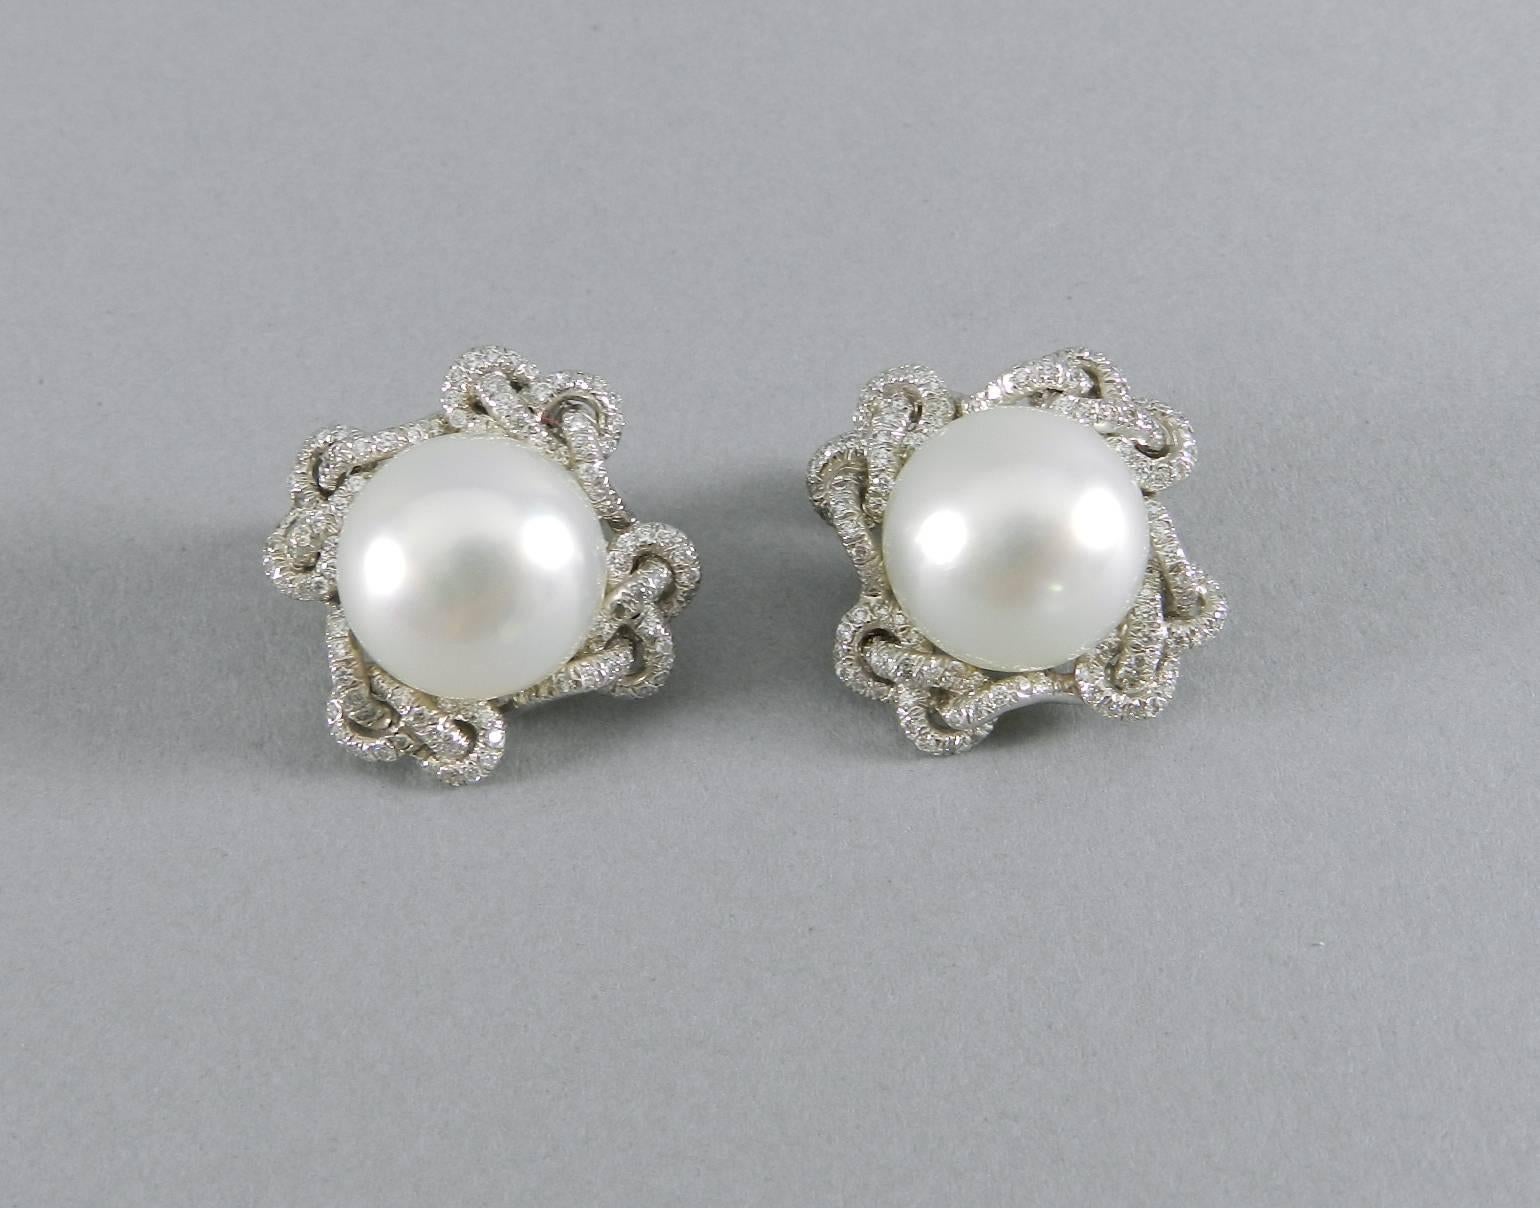 Verdura south sea pearl, platinum, diamond clip earrings.  South sea cultured pearl centre surrounded by platinum braided pave diamond lace border.  

Pearls measure approximately 14.7 x 12.8 mm and 14.6 x 12.5 mm.  White color with smooth finish,